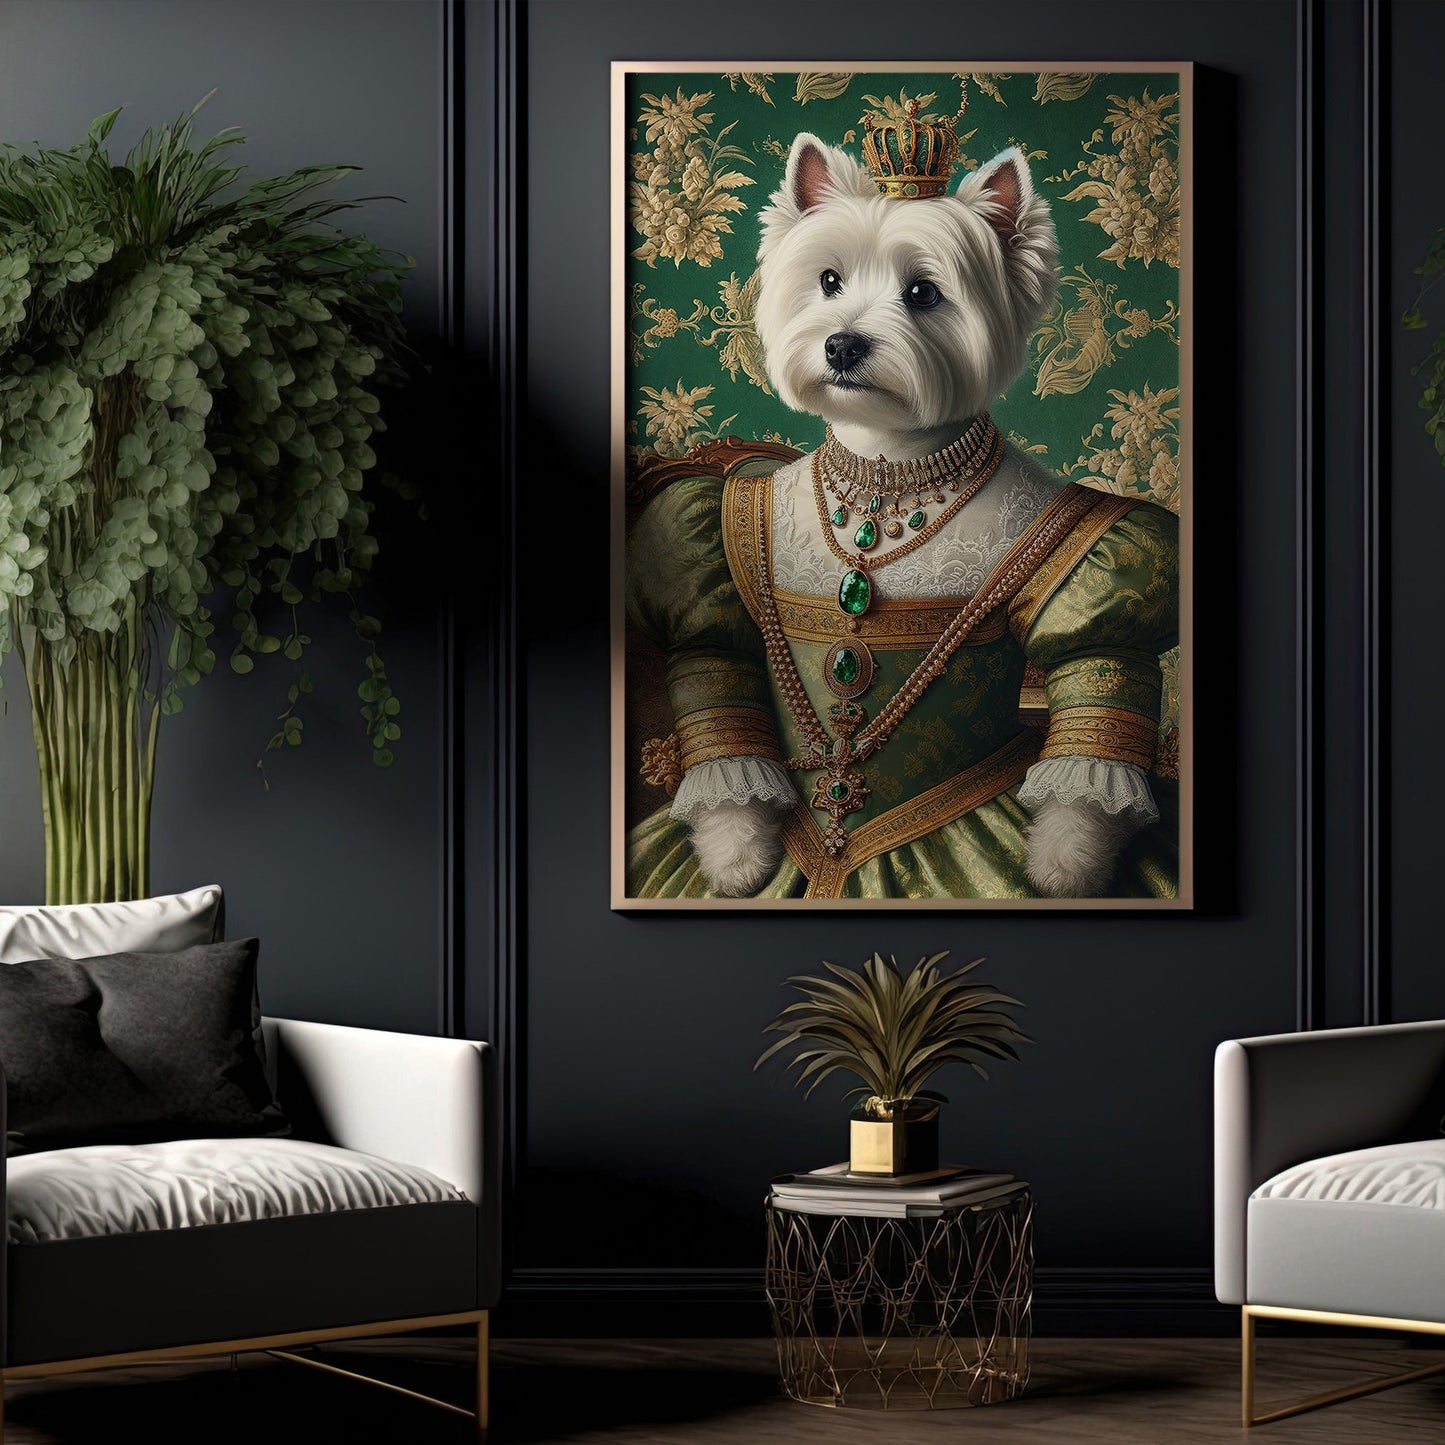 Queen West Highland White Terrier In Suit, Victorian Dog Canvas Painting, Victorian Animal Wall Art Decor, Poster Gift For Westie Dog Lovers